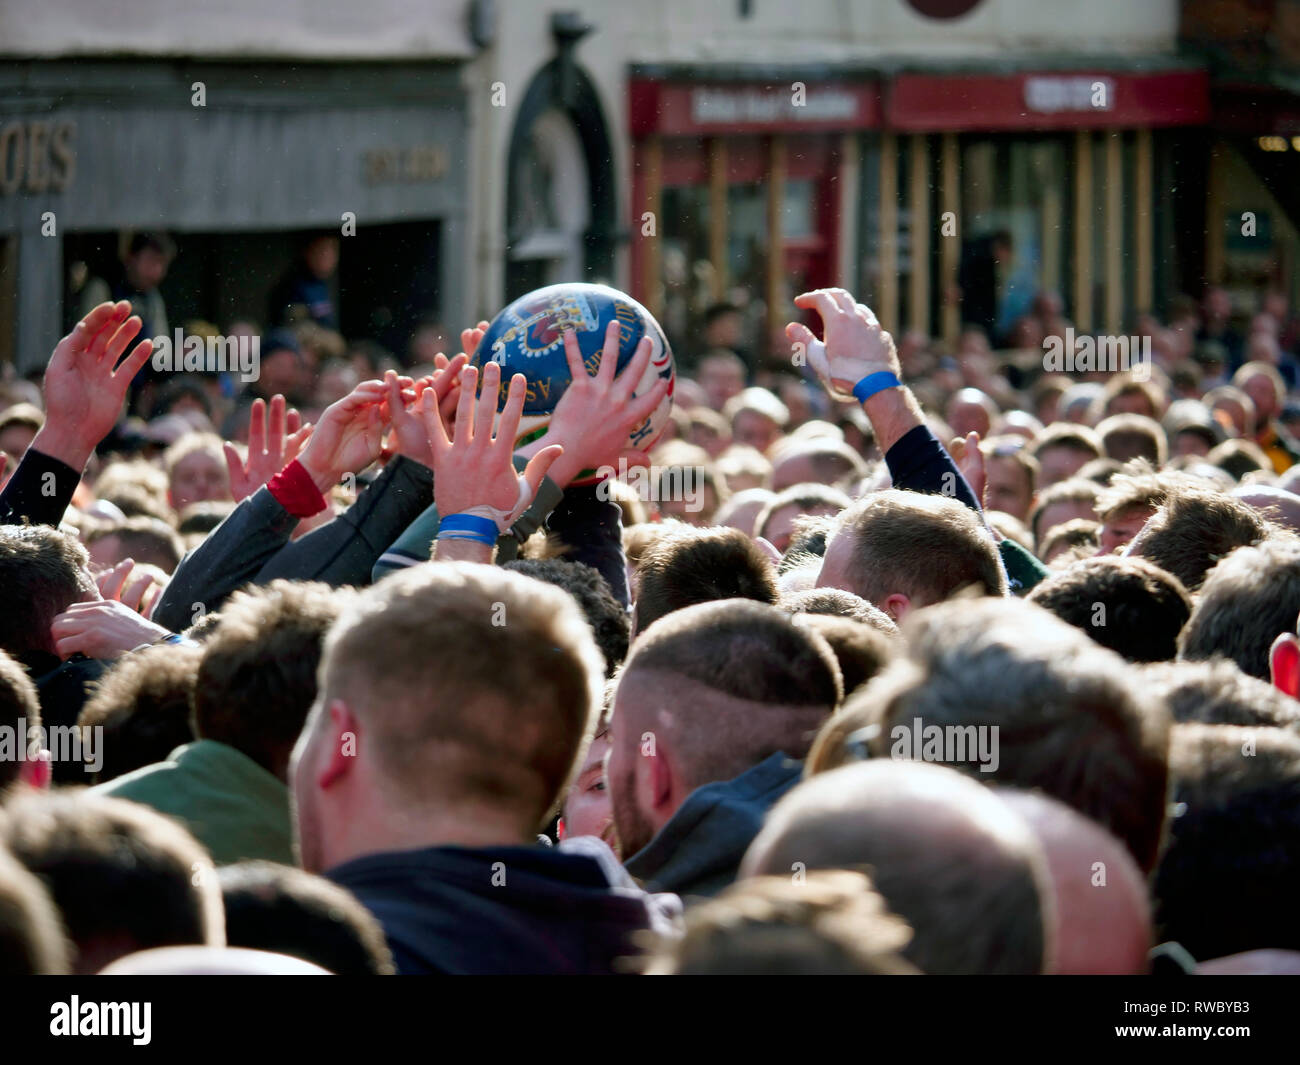 Ashbourne Derbyshire, UK. 5th Mar, 2019. Ashbourne Royal Shrovetide Football match on Shrove Tuesday. Ye Olde & Ancient Medieval hugball game is the forerunner to football. It's played between two teams, the Up'Ards & Down'Ards separated by the Henmore Brook river. The goals are 3 miles apart at Sturston Mill & Clifton Mill. Charles Cotton's poem Burlesque upon the Great Frost, dating from 1683, mentions this game at Ashbourne. He was the cousin of Aston Cockayne Baronet of Ashbourne, Derbyshire. Credit: Doug Blane/Alamy Live News Stock Photo